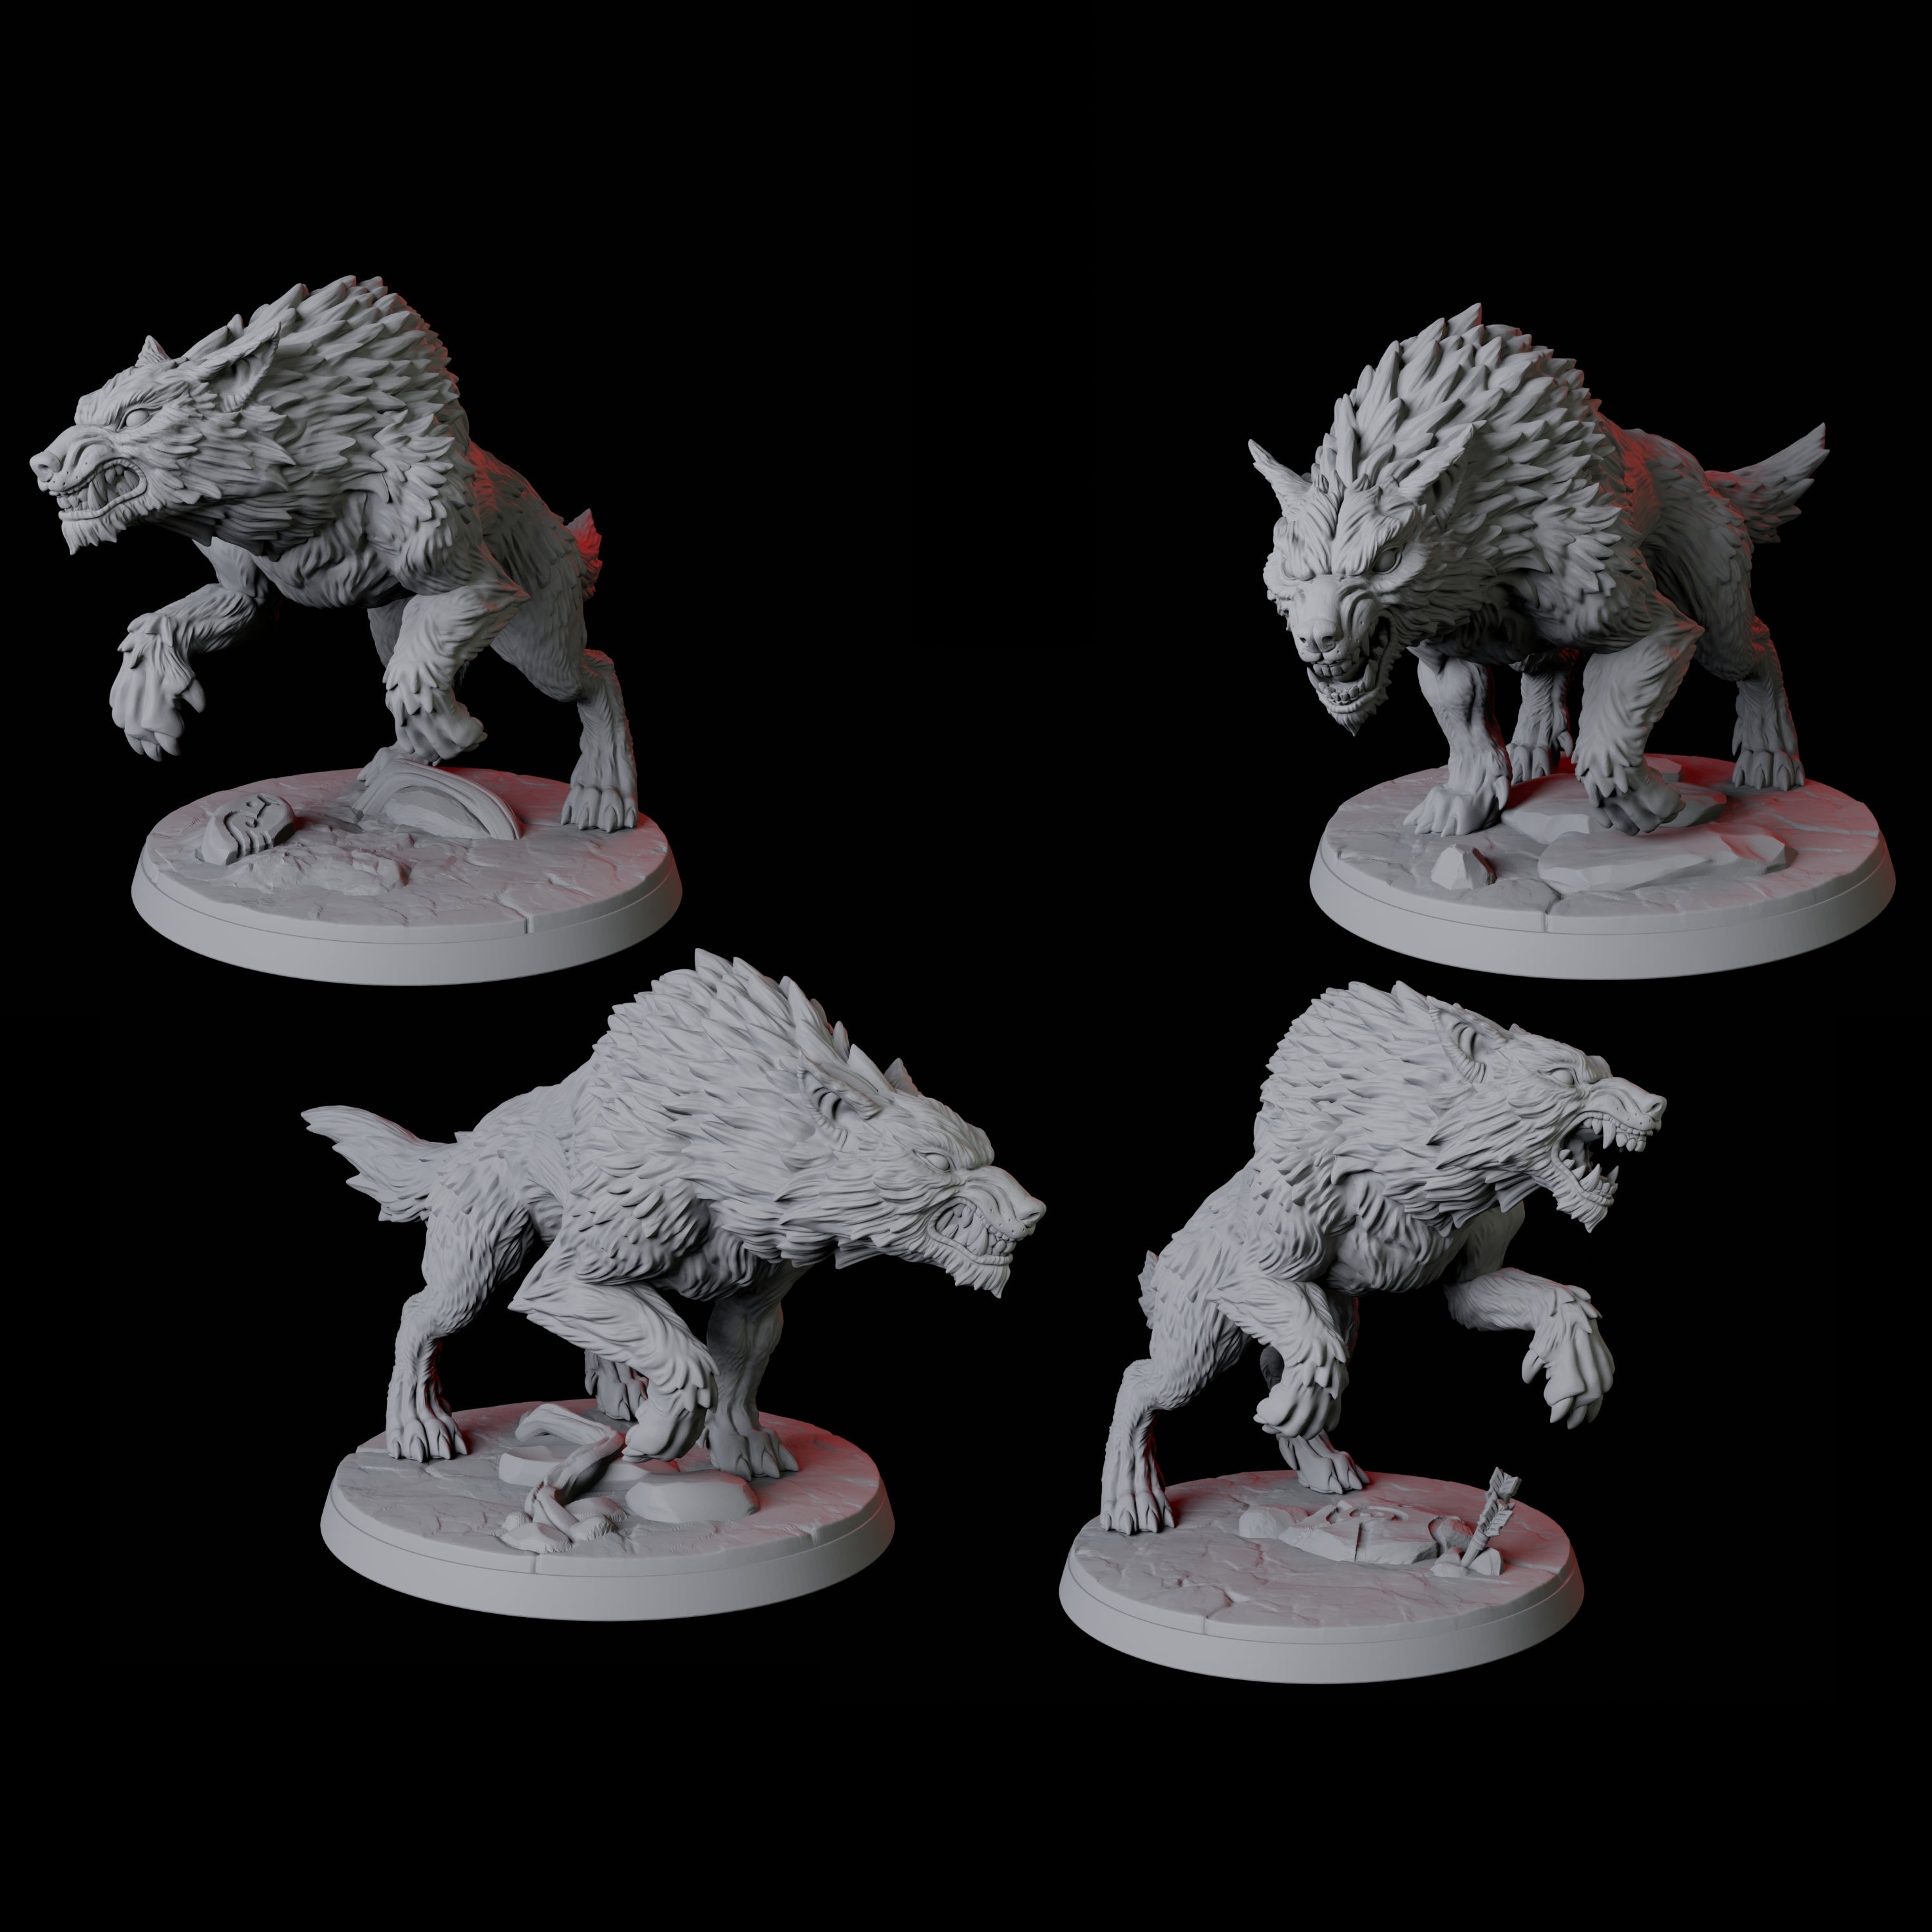 Four Stalking Wolves Miniature for Dungeons and Dragons, Pathfinder or other TTRPGs